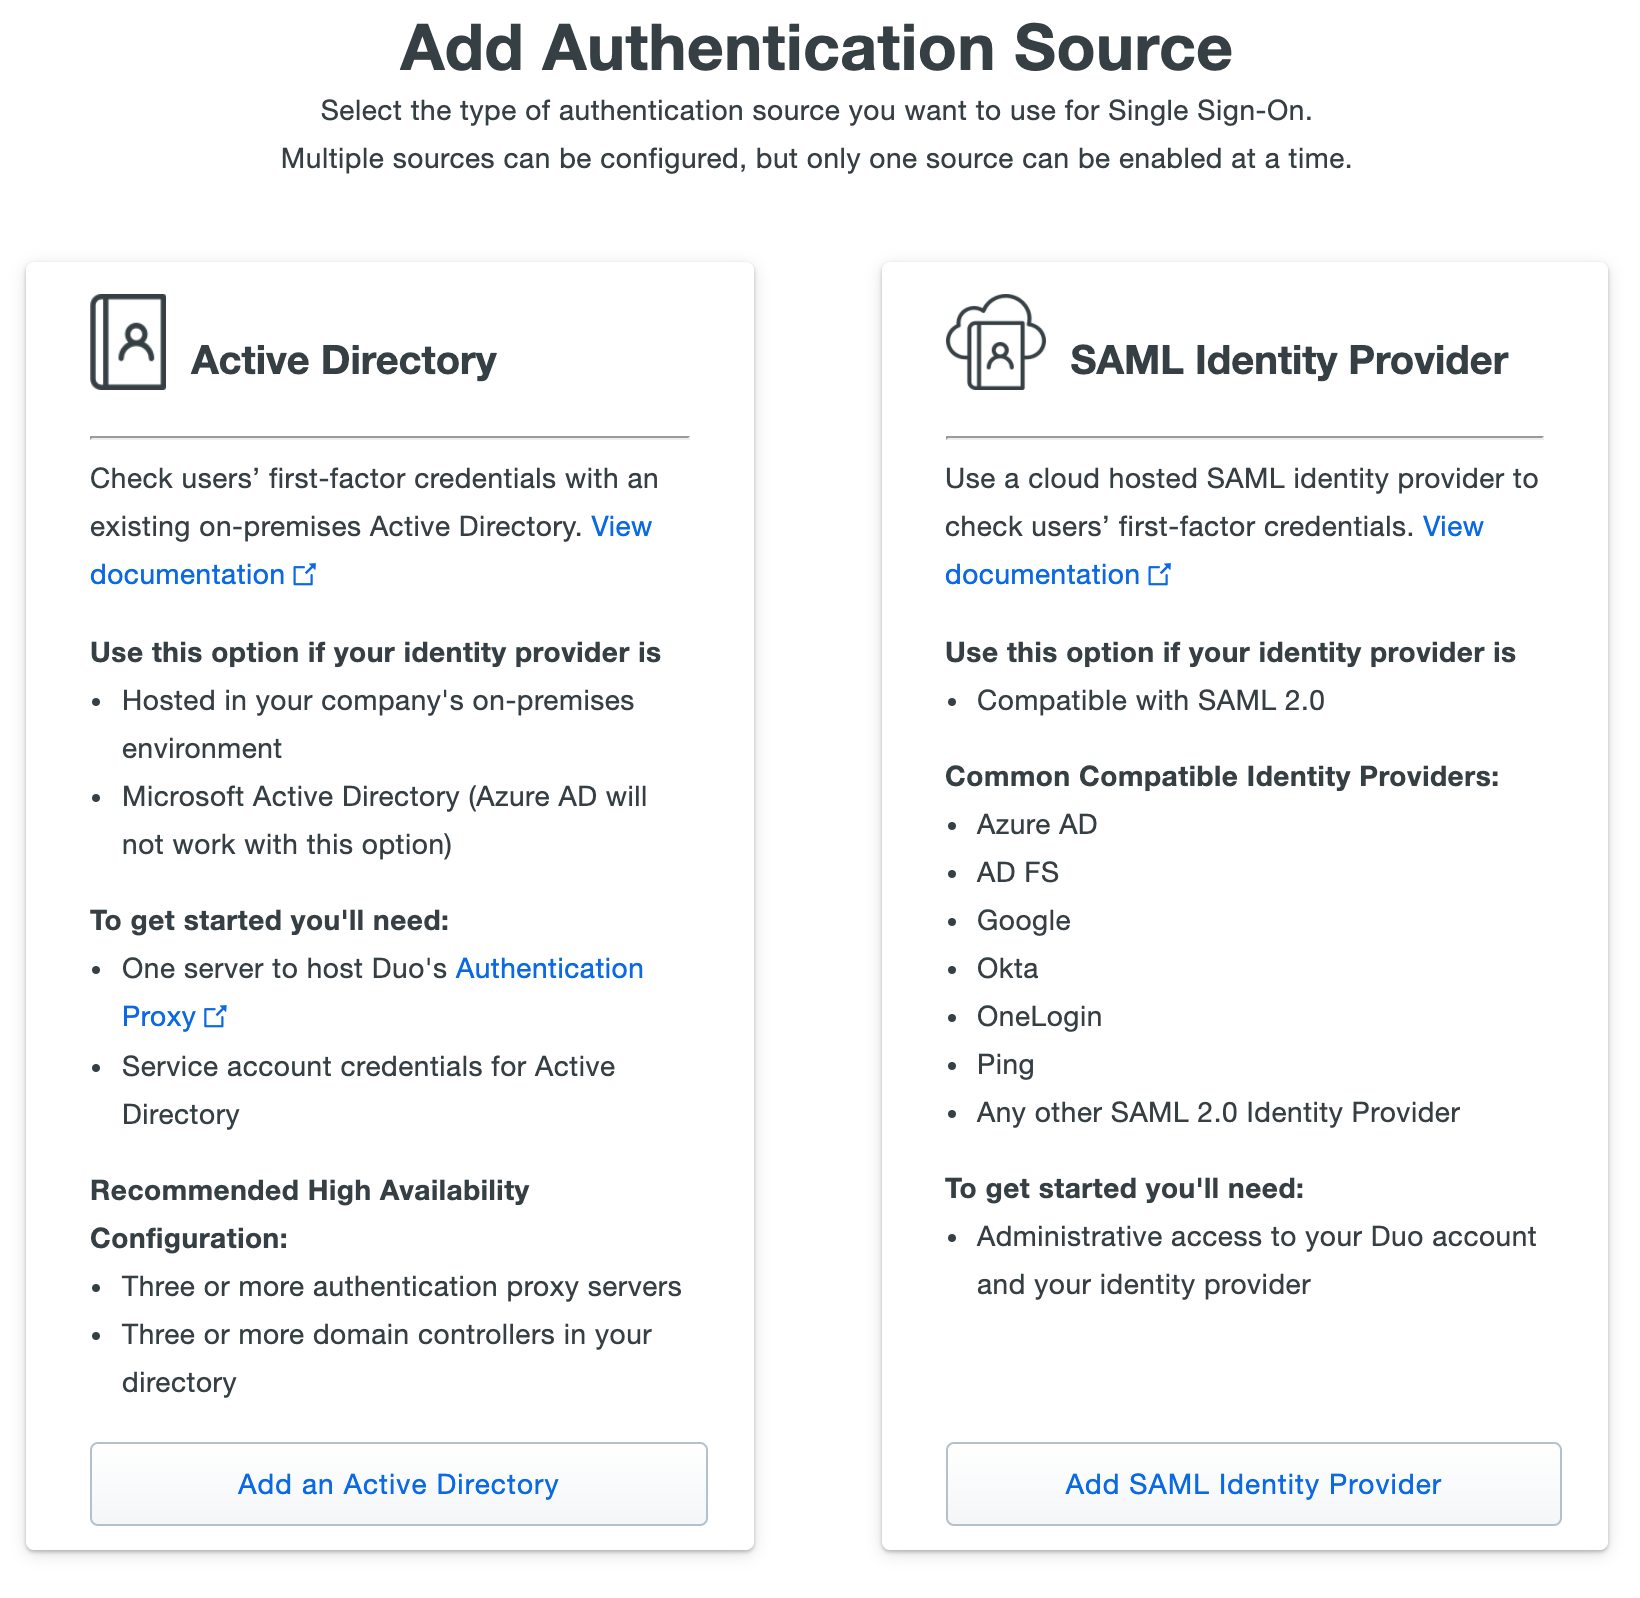 Choosing an authentication source